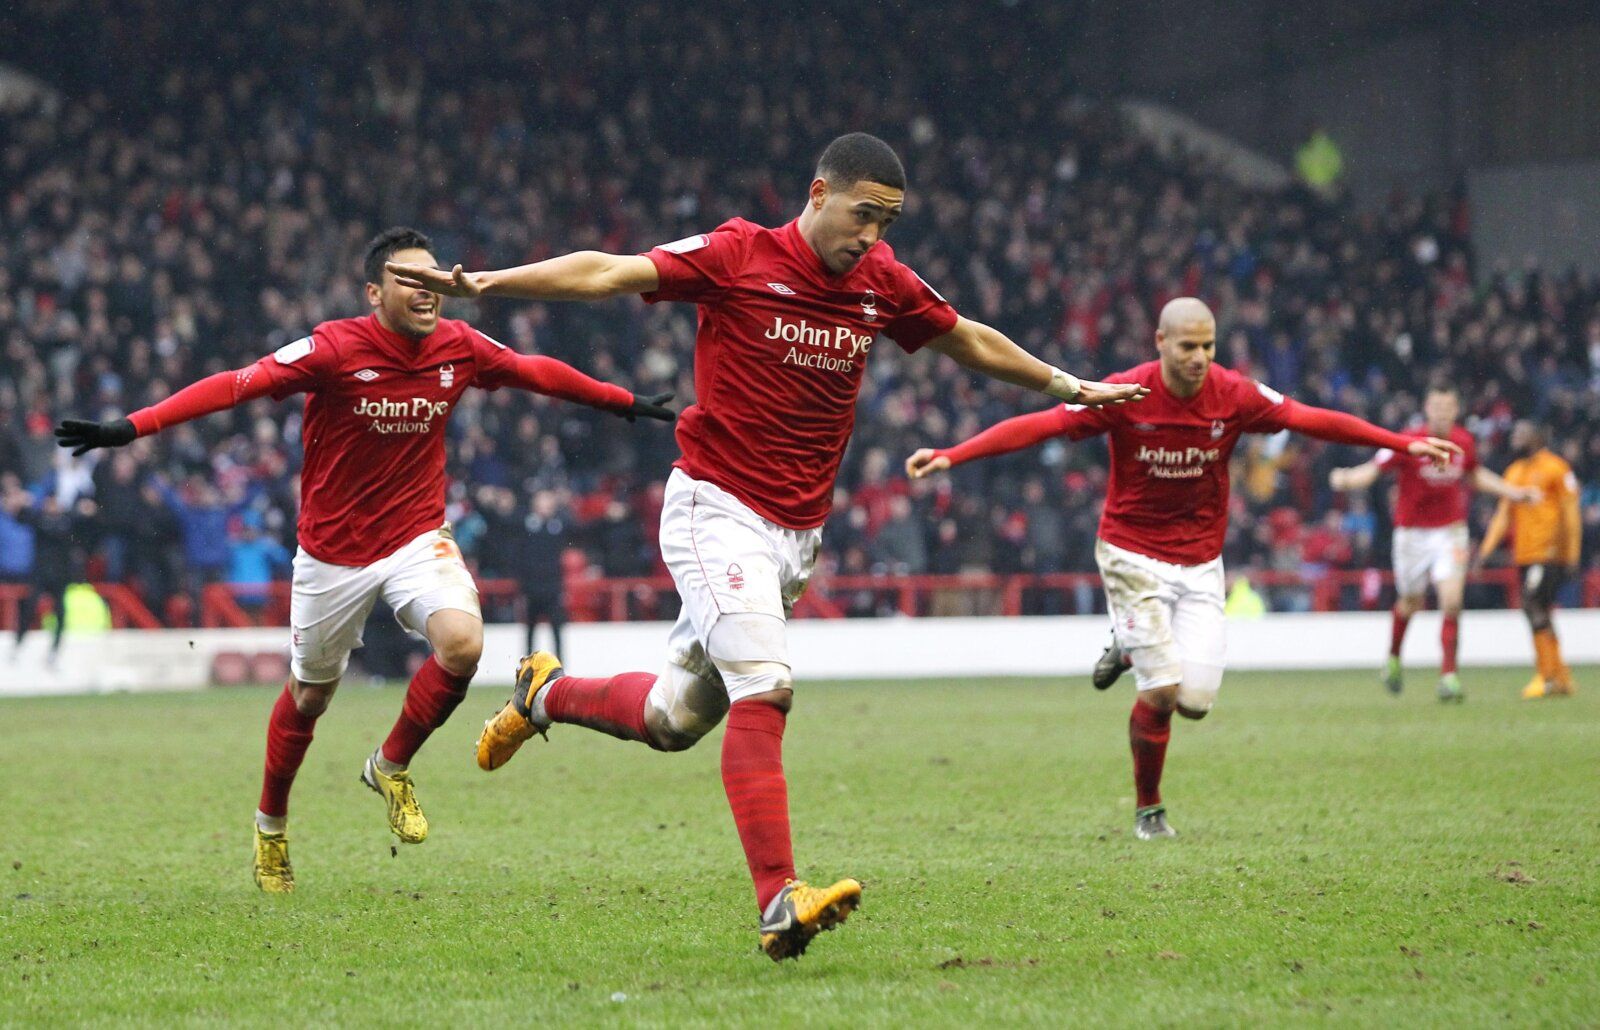 Football - Nottingham Forest v Wolverhampton Wanderers - npower Football League Championship - The City Ground  - 9/3/13 
Lewis McGugan (C) celebrates after scoring the third goal for Nottingham Forest 
Mandatory Credit: Action Images / Ed Sykes 
Livepic 
EDITORIAL USE ONLY. No use with unauthorized audio, video, data, fixture lists, club/league logos or live services. Online in-match use limited to 45 images, no video emulation. No use in betting, games or single club/league/player publications